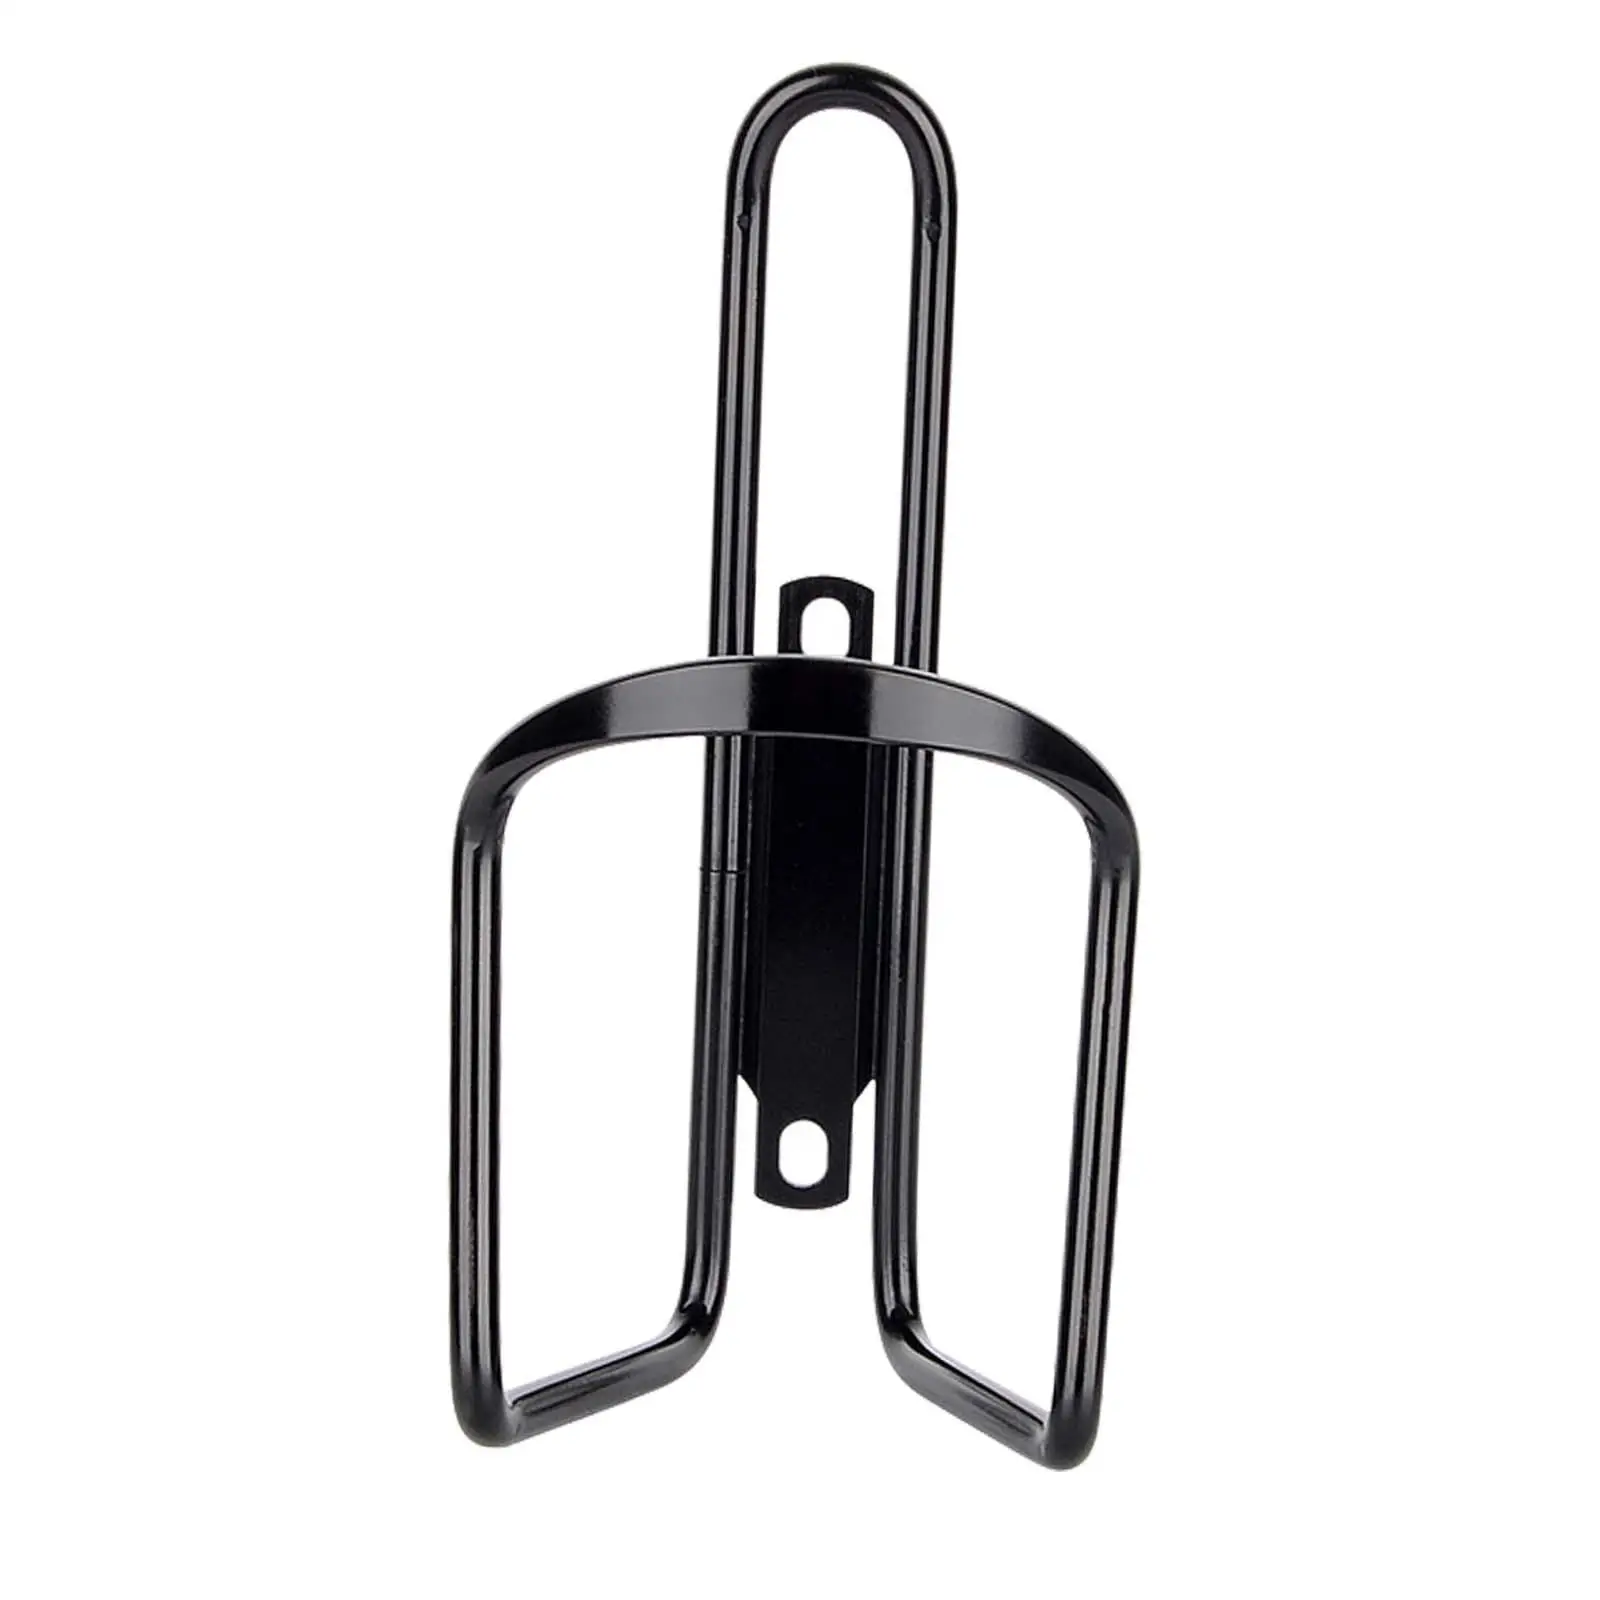 Kettle Cup Holder Drink Rack Carrier Ultralight for Sports Outdoor Fishing